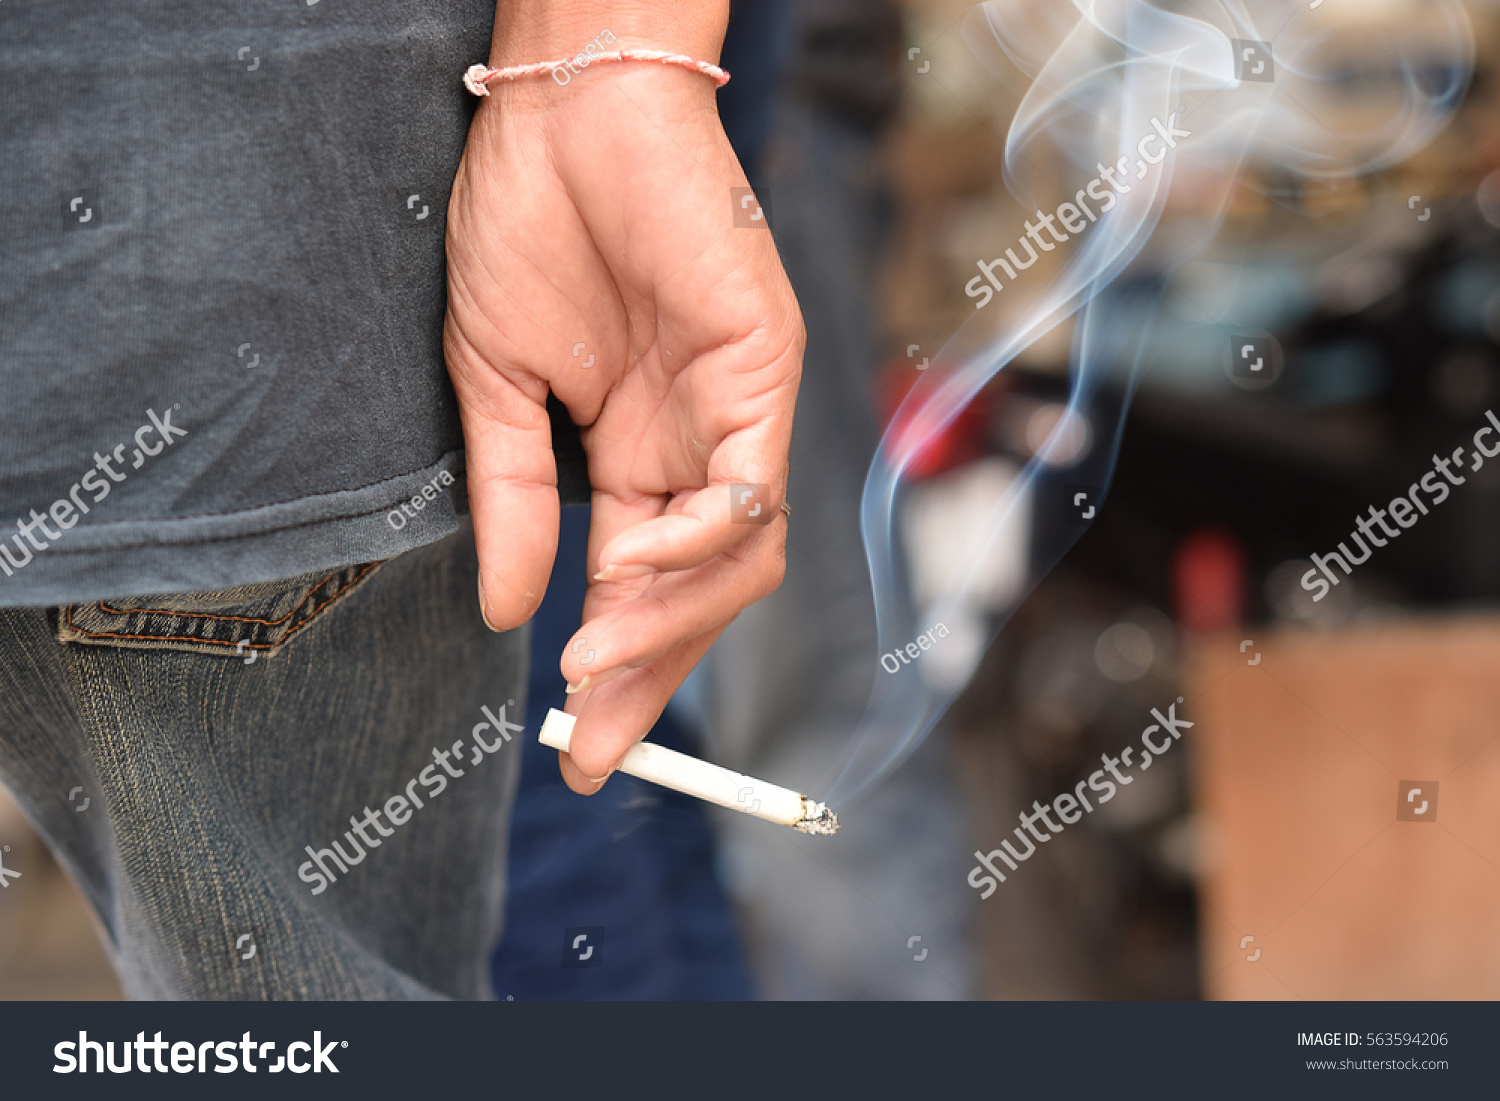 Image of cigarette in man hand with smoke. #563594206